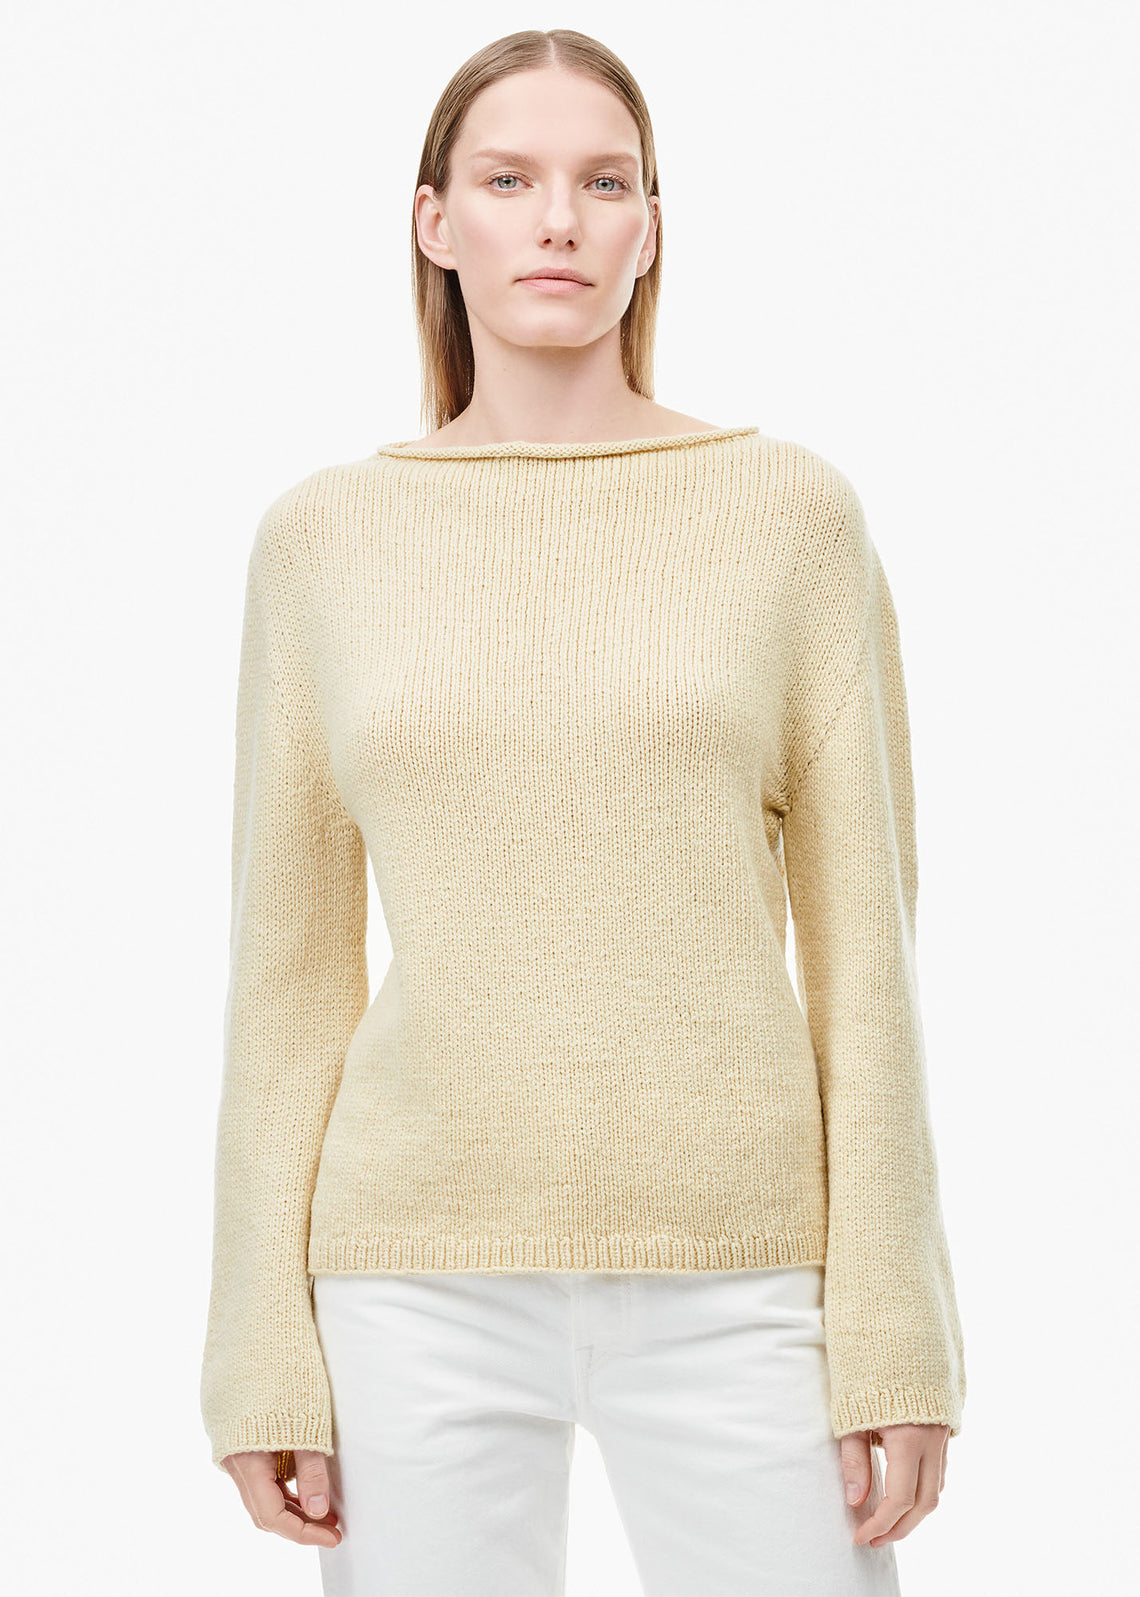 Wommelsdorff Clothing & Sweaters | Tiina the Store